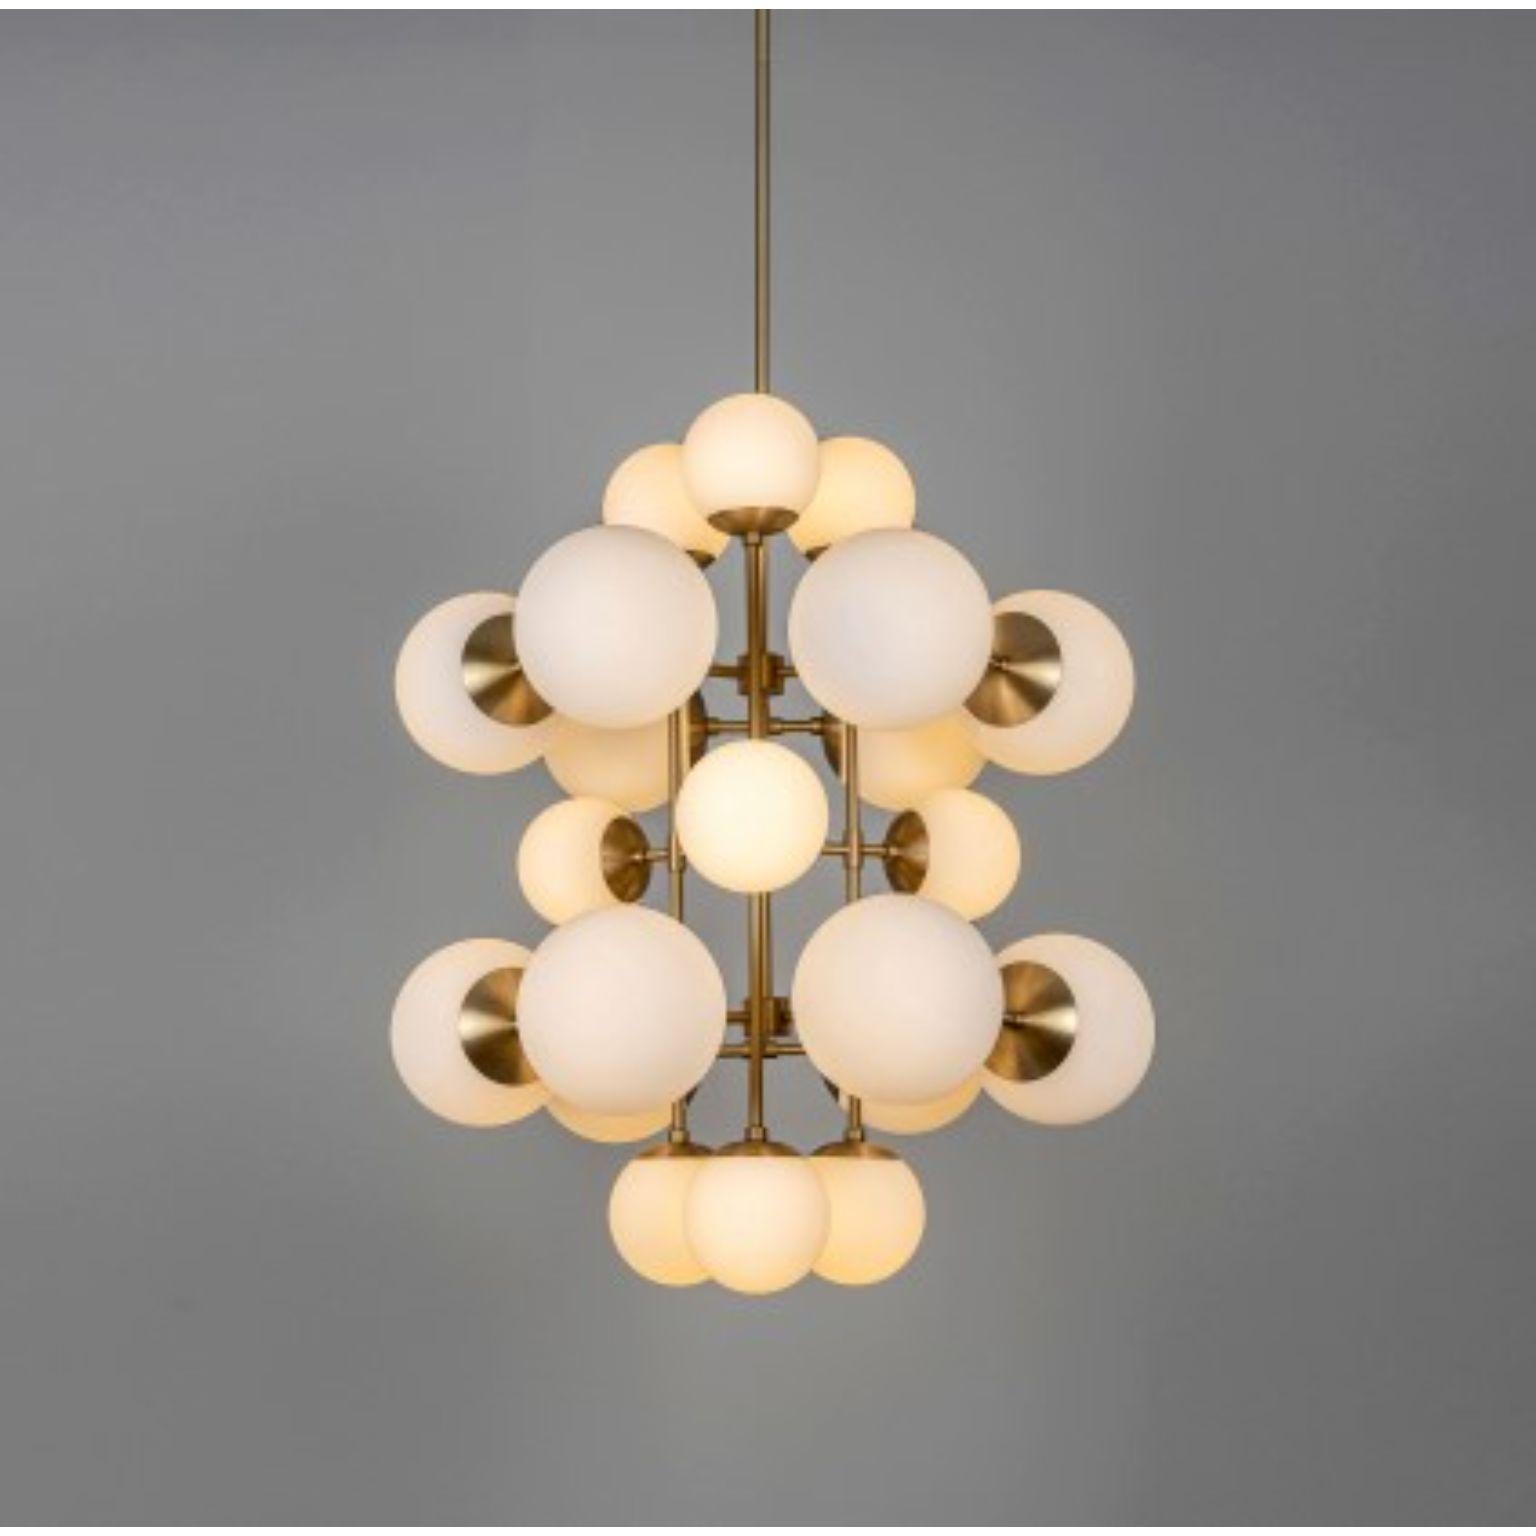 Glow Chandelier by Schwung
Dimensions: D80.5 x H 188.1 cm
Materials: brass, opal glass
Weight: 16.8 kg

Finishes available: black gunmetal, polished nickel, brass
Other sizes available. 

 Schwung is a german word, and loosely defined, means